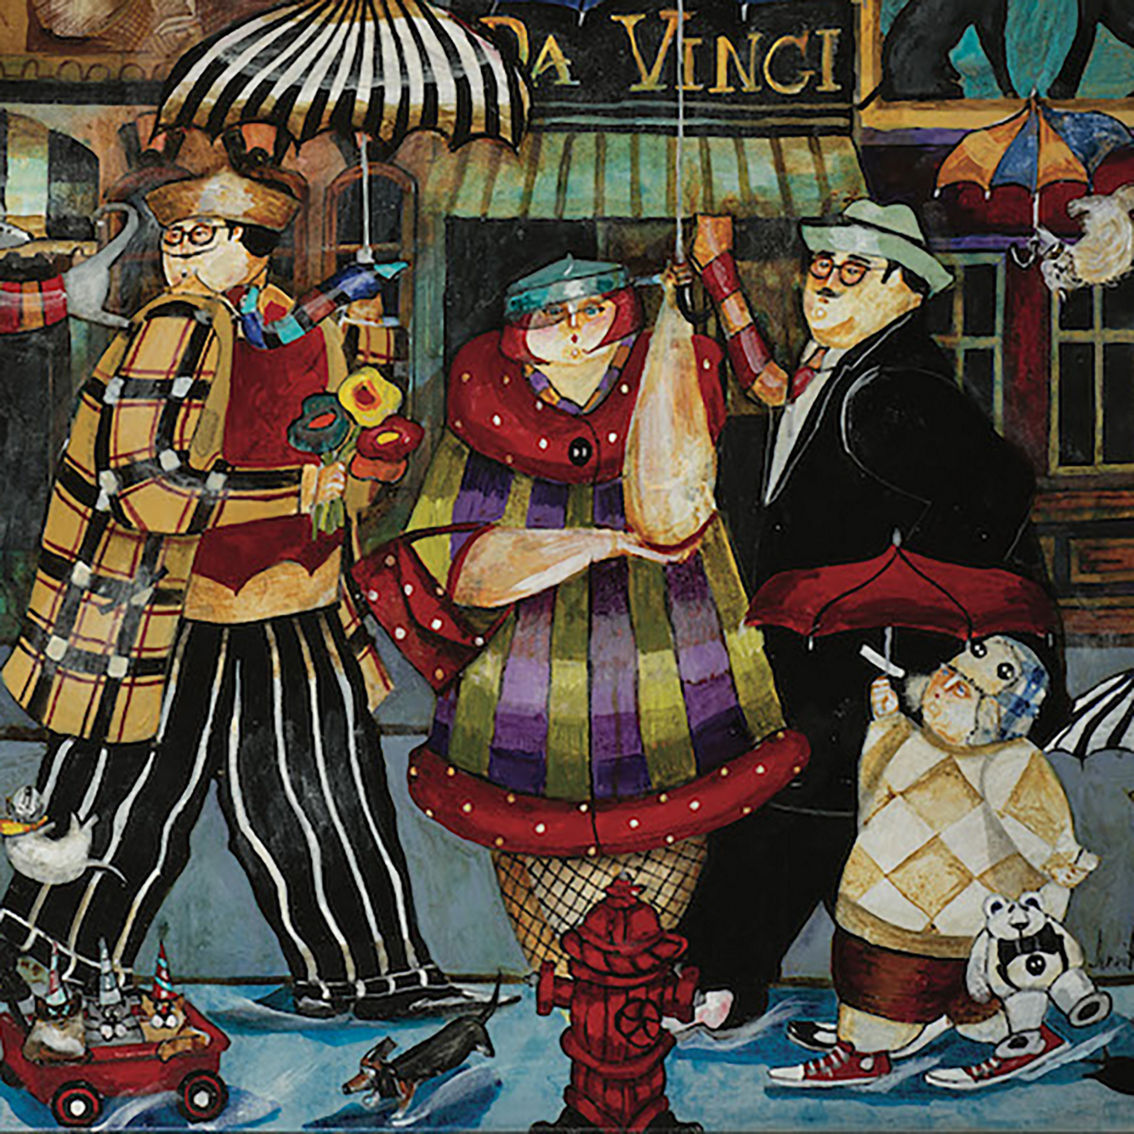 Hart Puzzles Raining Cats and Dogs in Paris 1,000 pc. Puzzle - Image 6 of 6